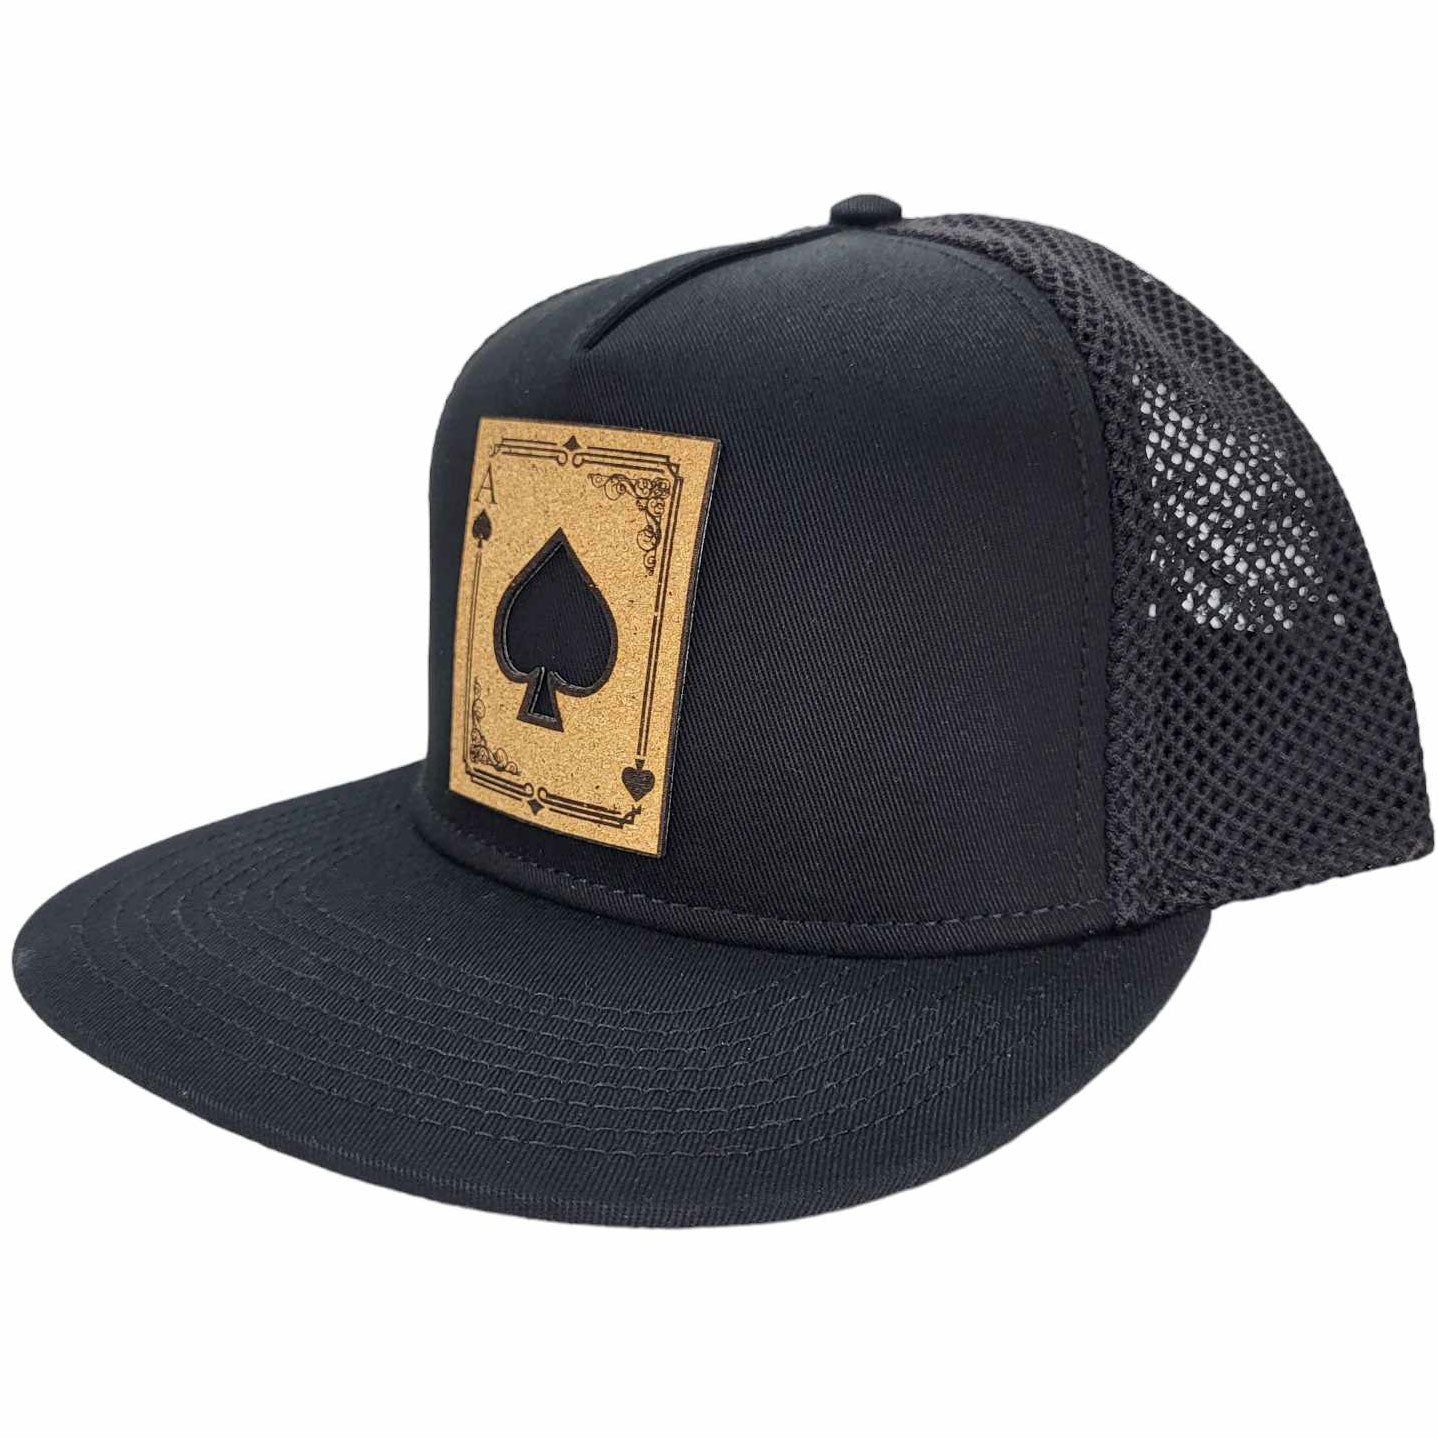 Ace Of Spades Hat